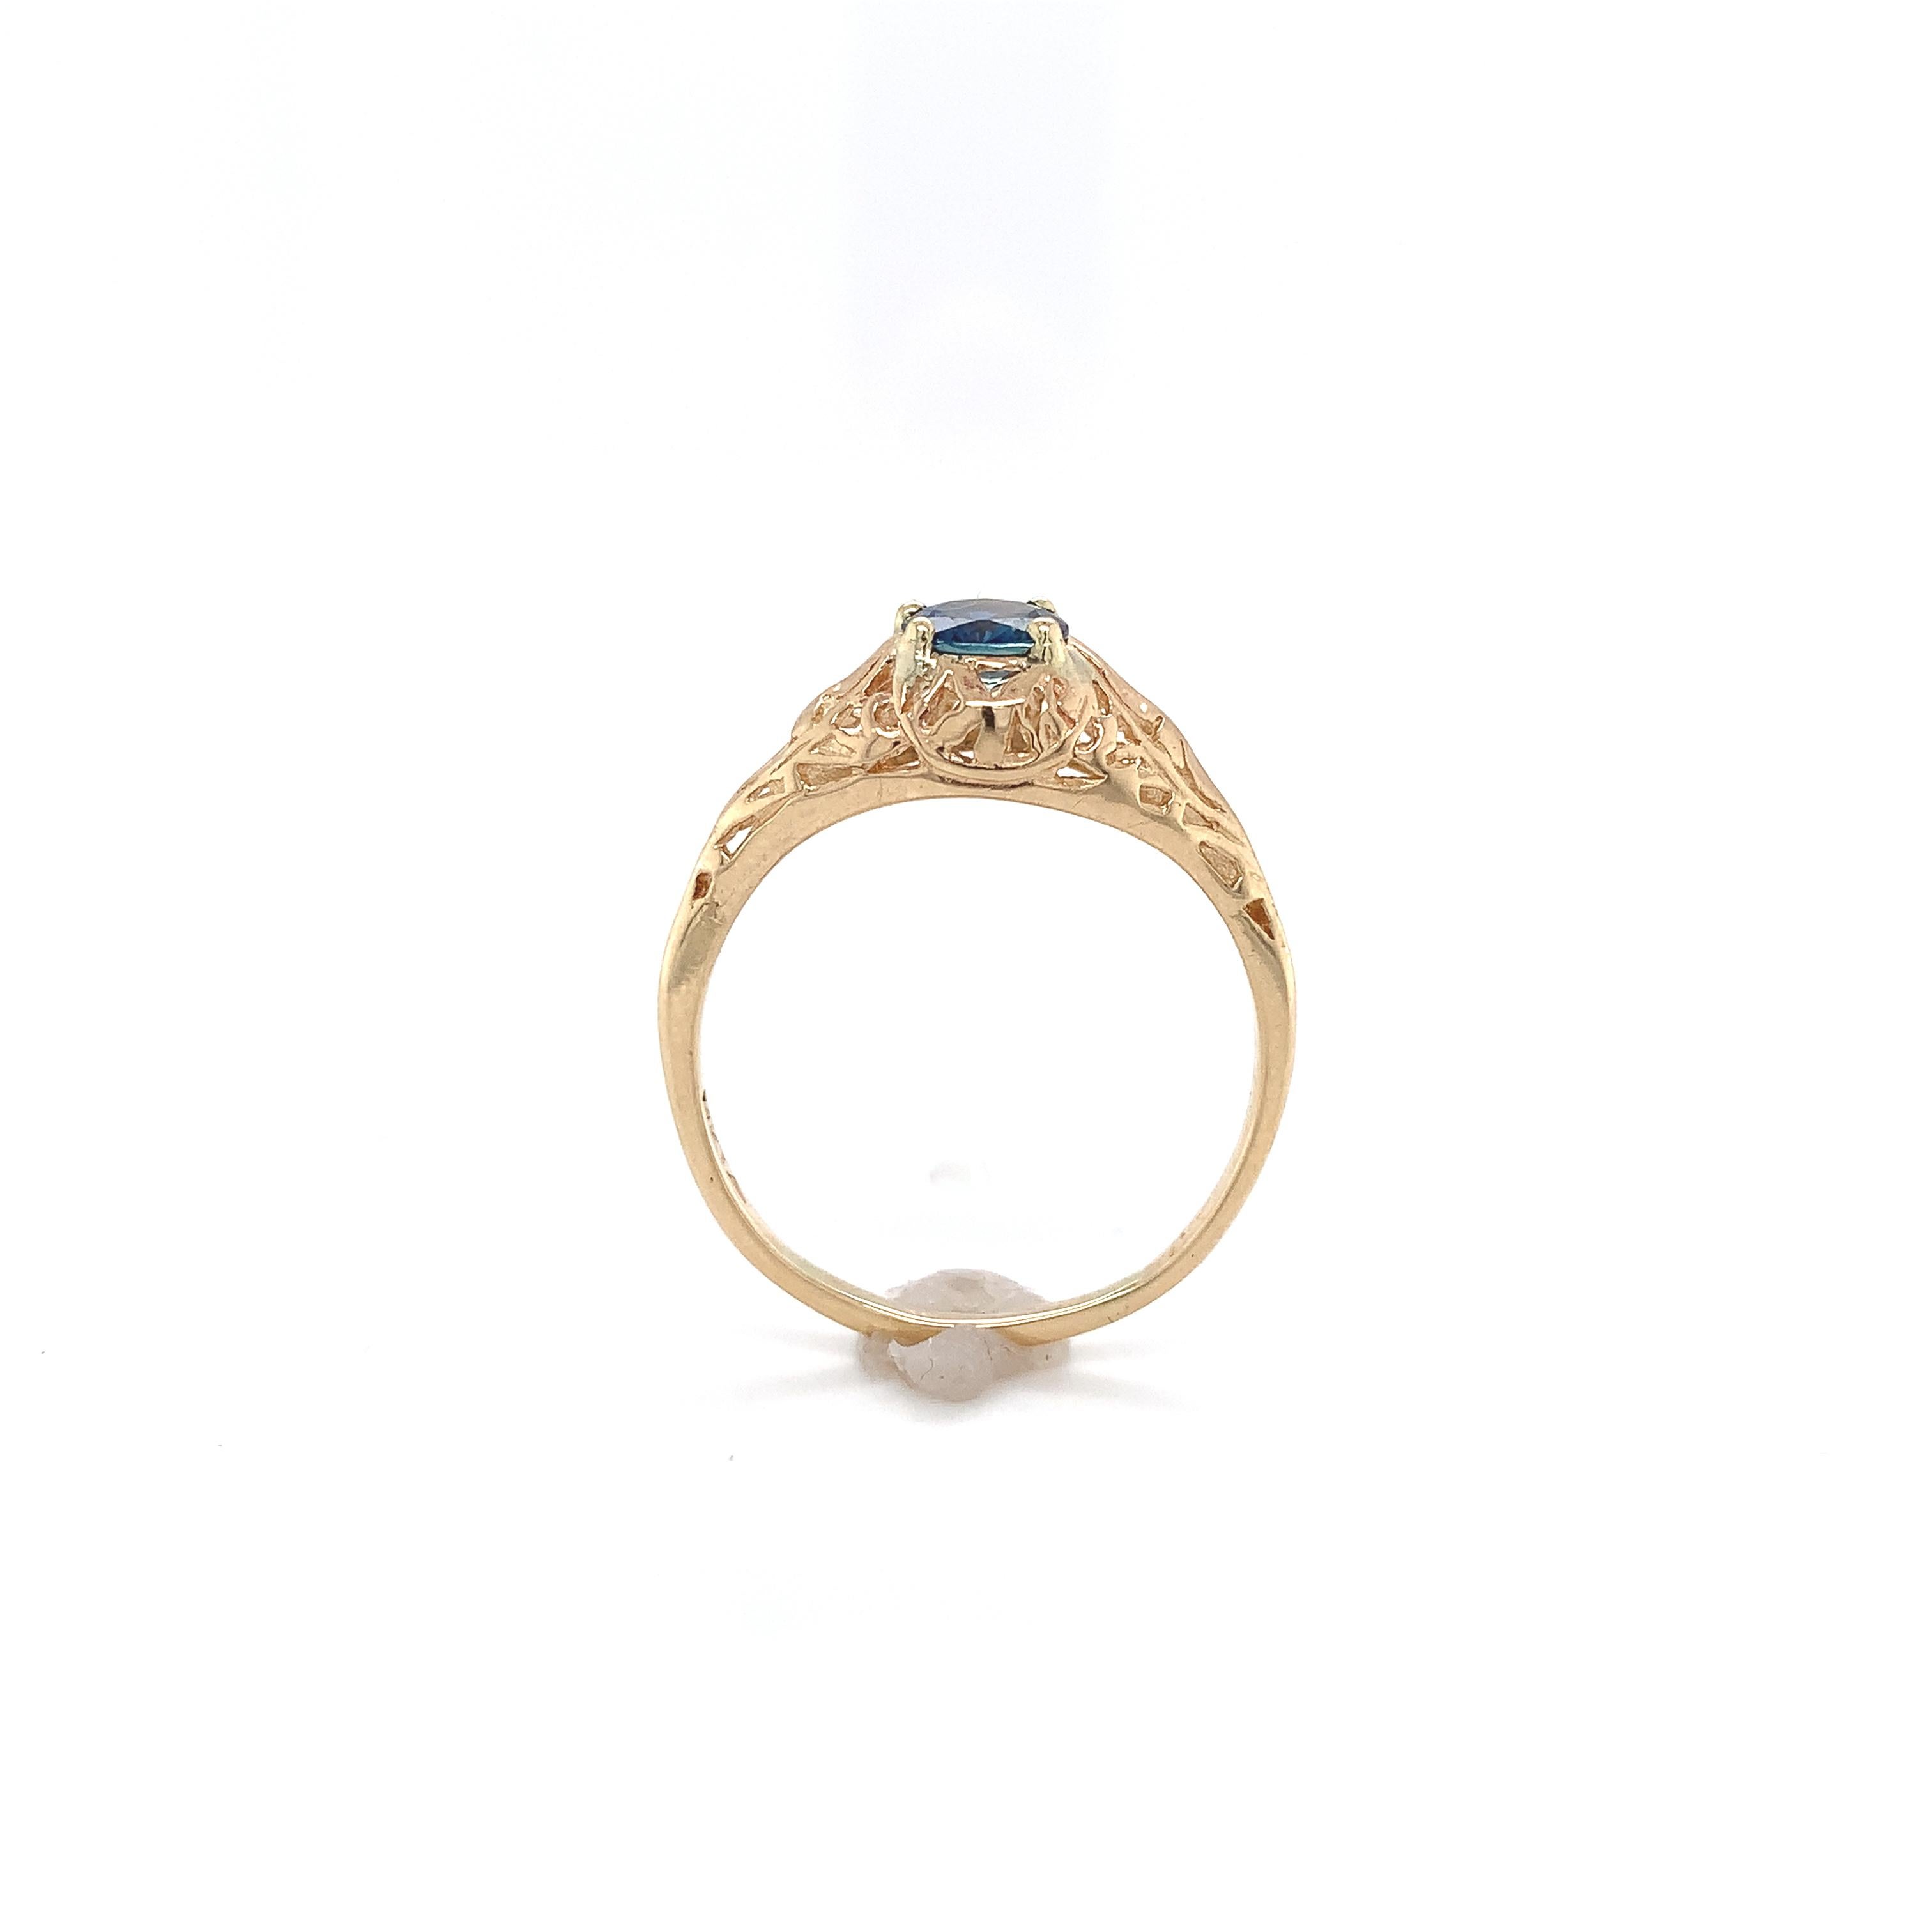 14K yellow gold filigree ring featuring a genuine blue sapphire weighing .63cts. The round sapphire measures about 5.3mm. The ring fits a size 8.75 finger, weighs 1.42 dwt. and is a newer piece made in the Art Deco style.